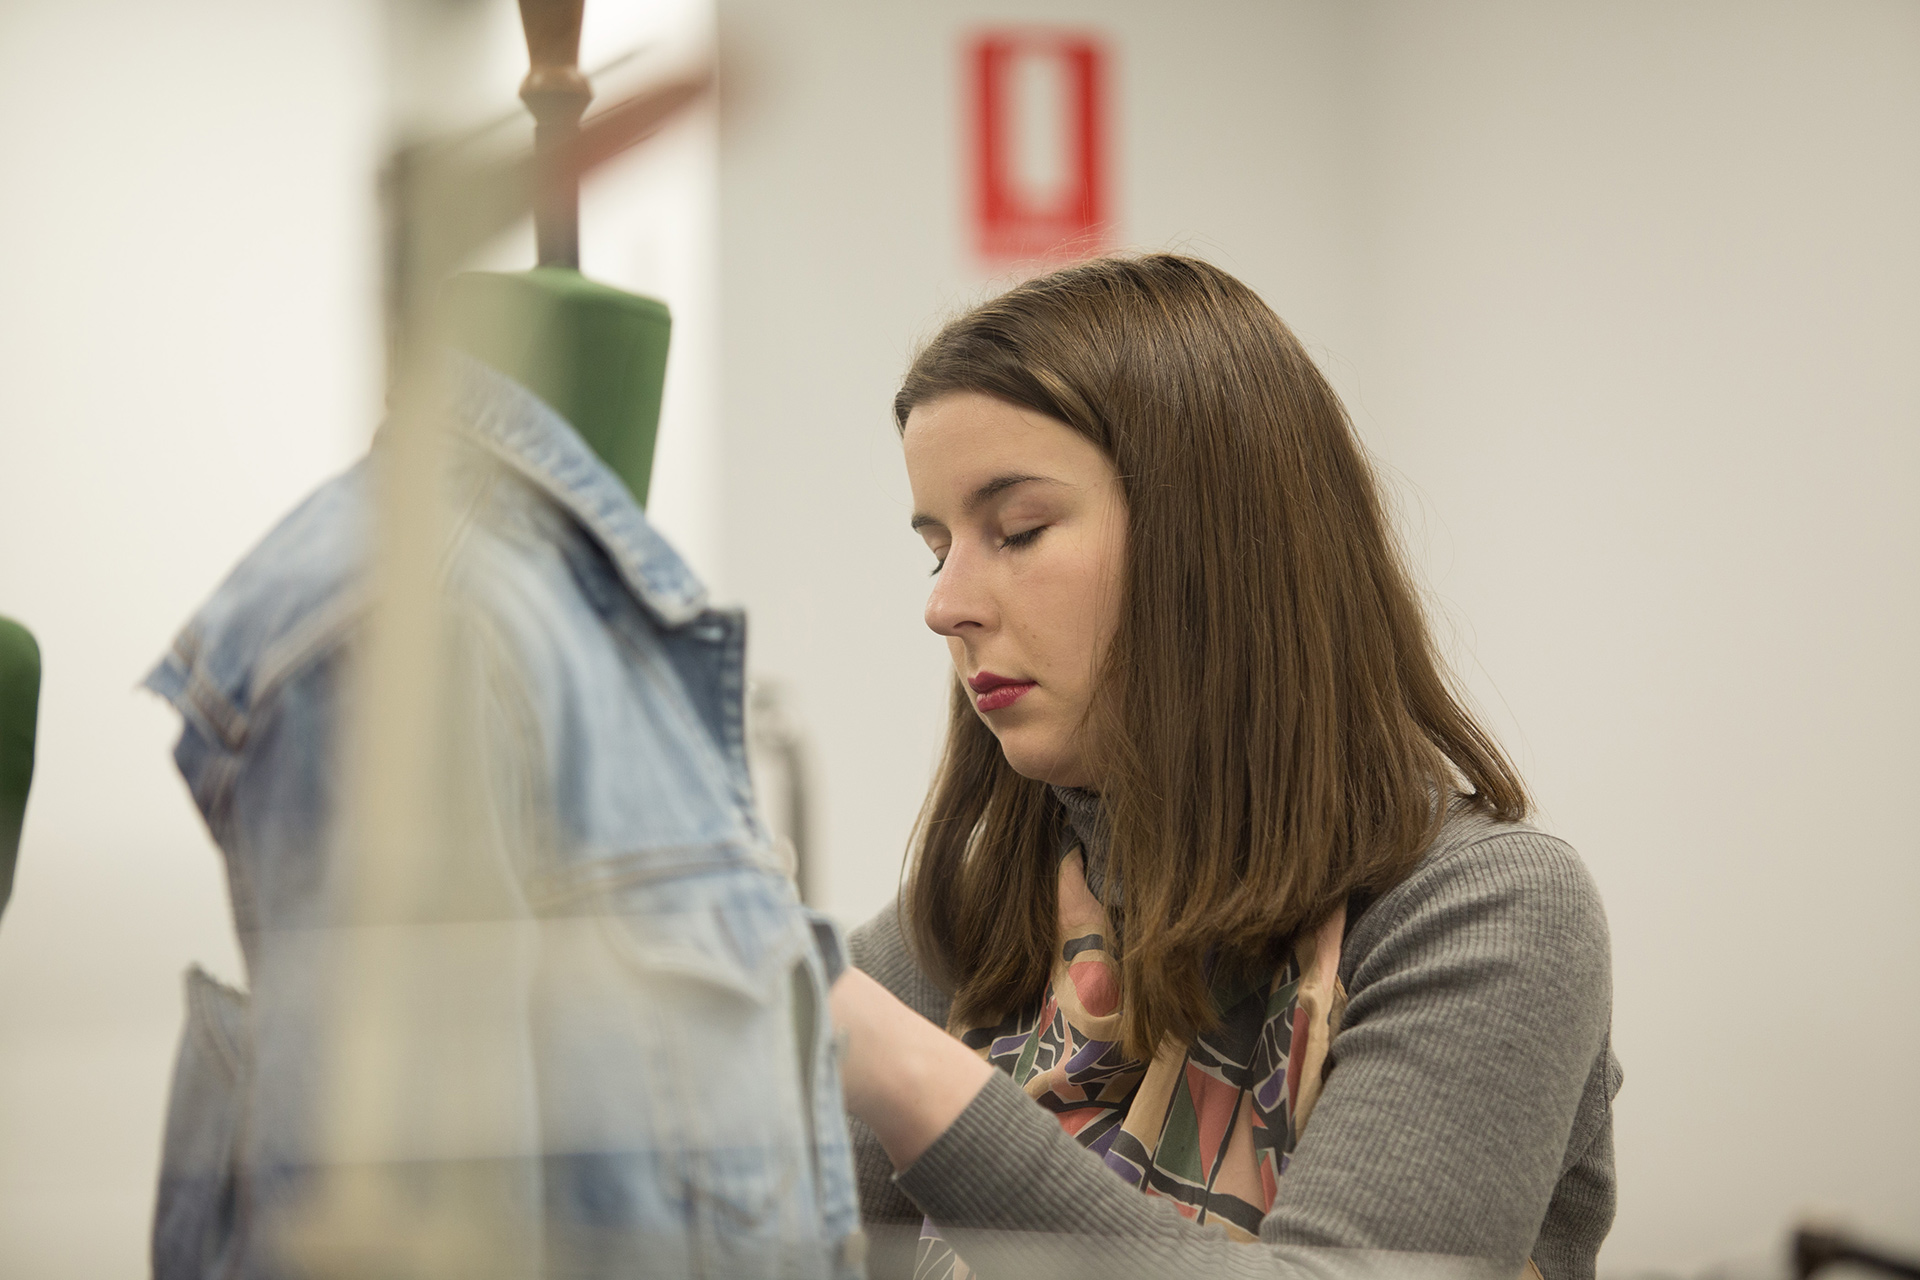 Sewing and experimenting at RMIT. Julia English - Bachelor of Fashion (Design) (Honours)